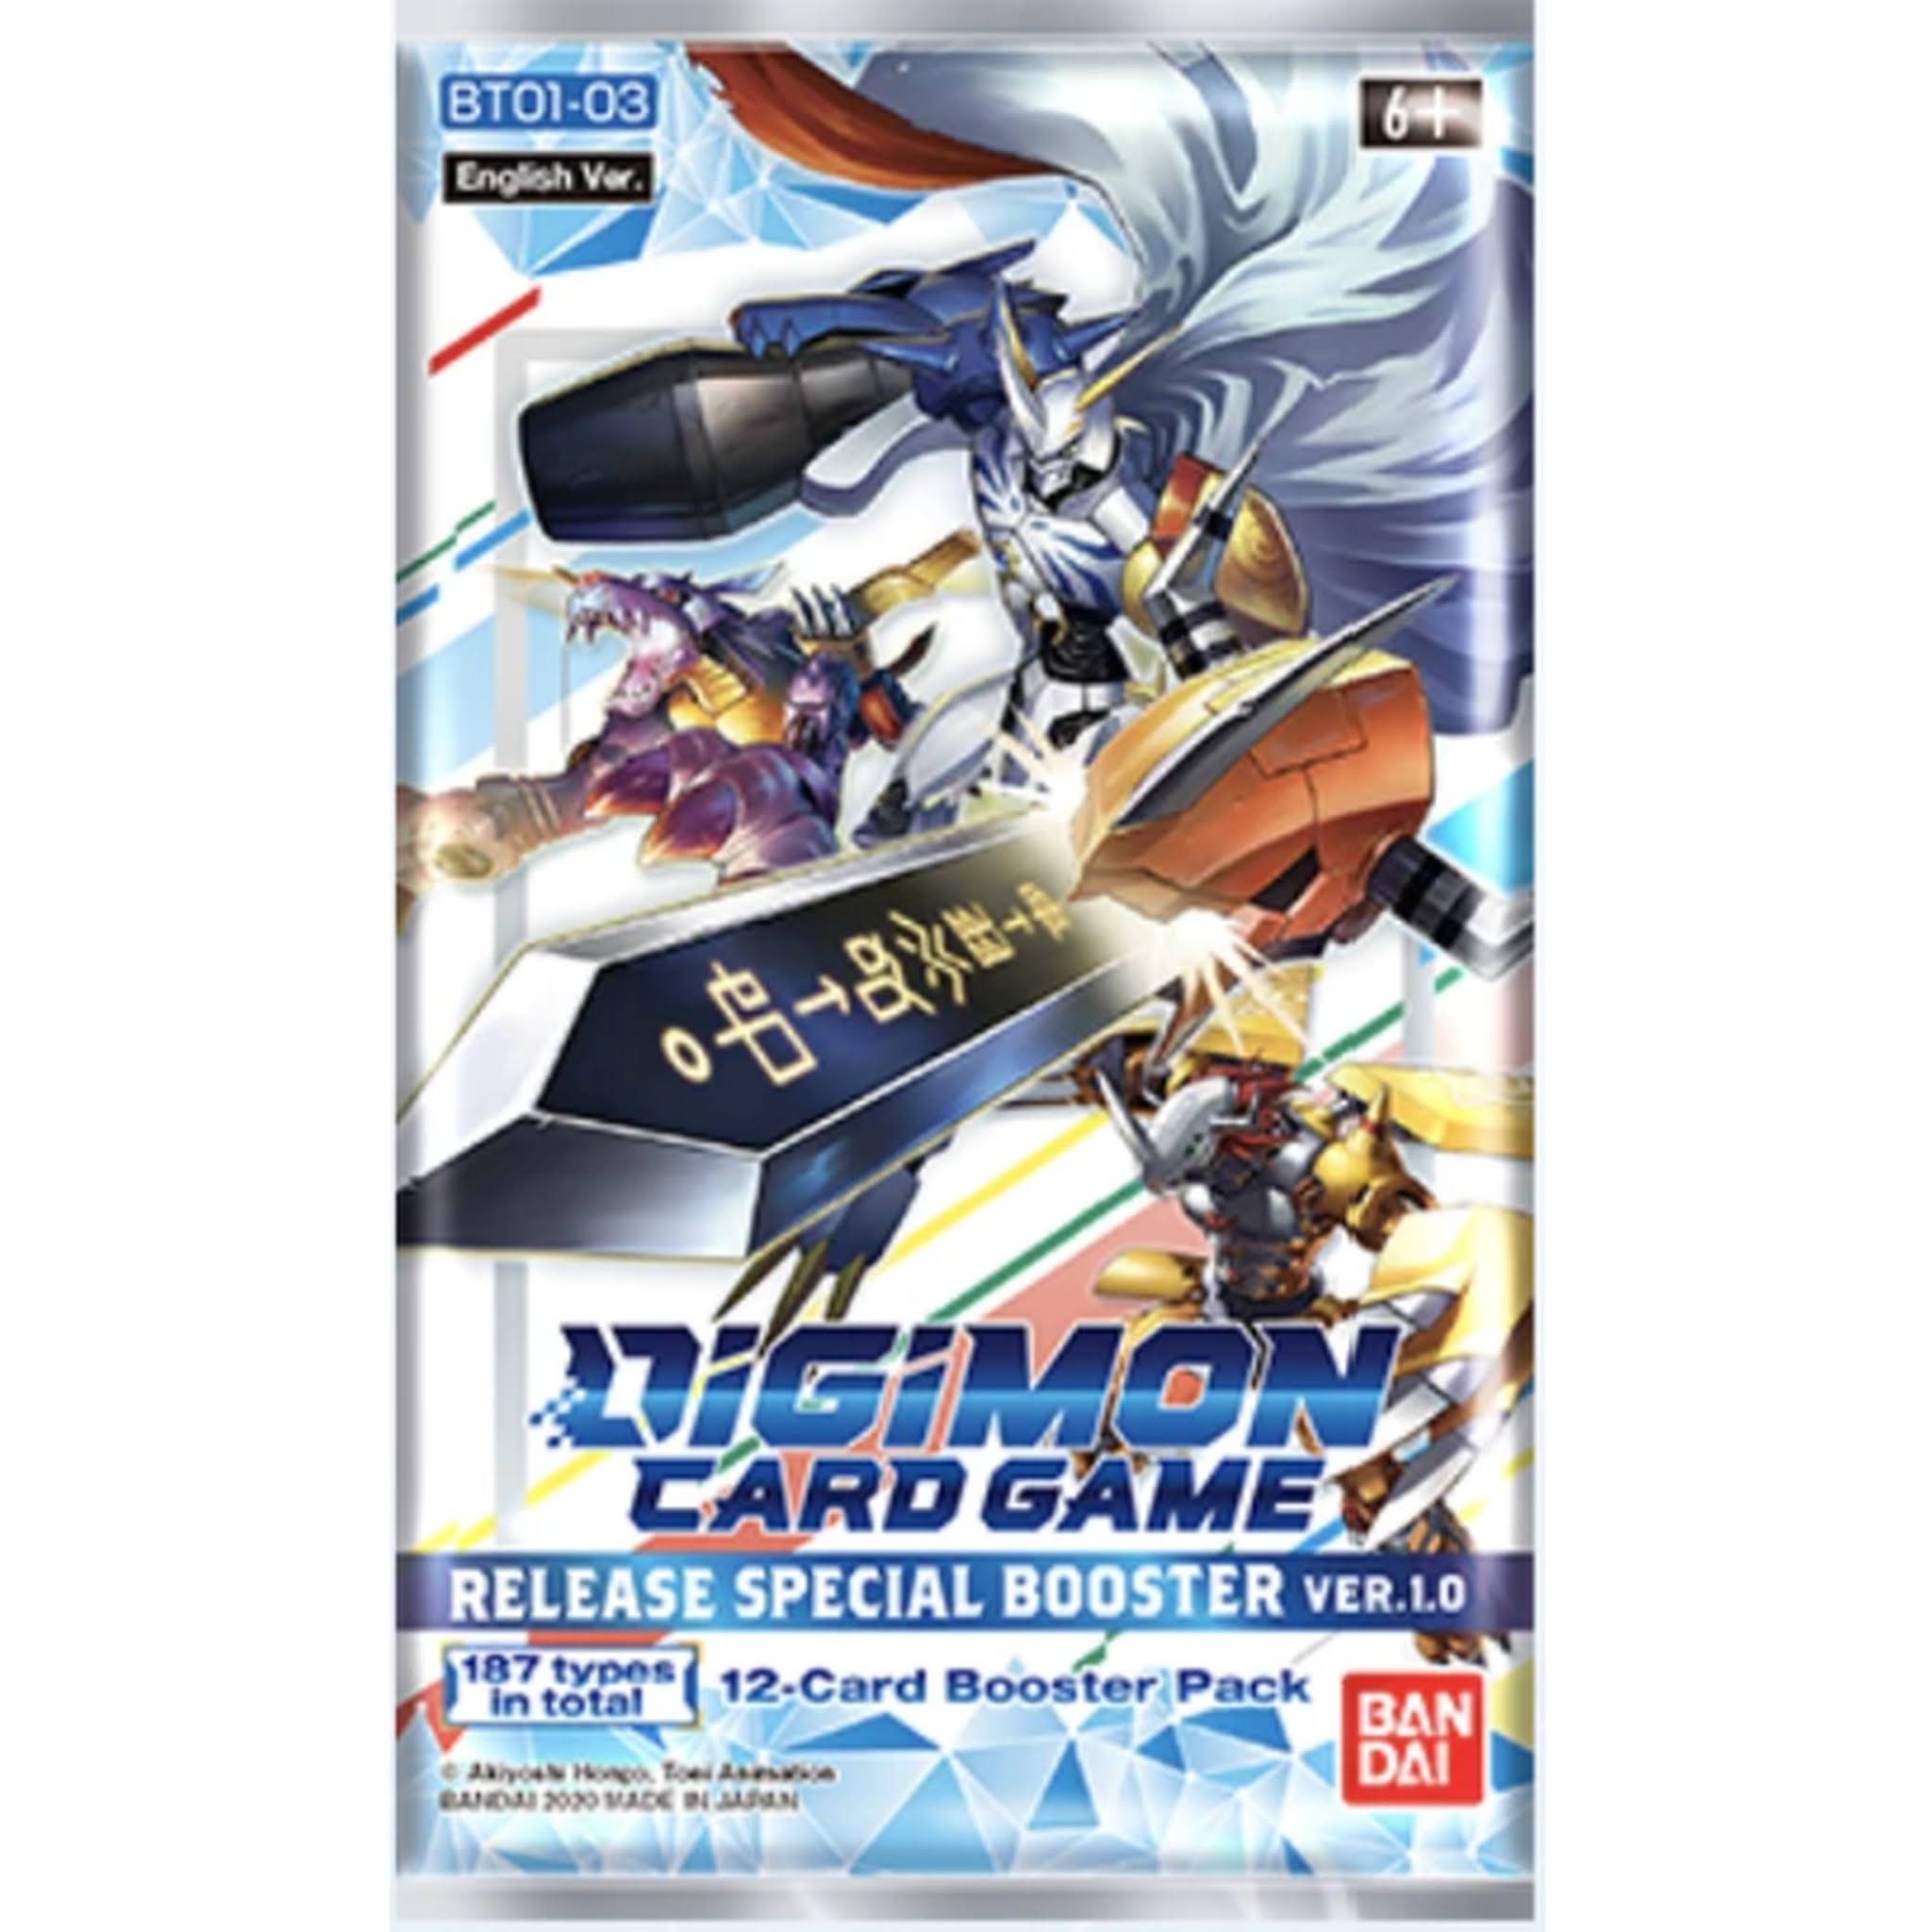 Digimon Card Game: Release Special Booster Pack Ver.1.0